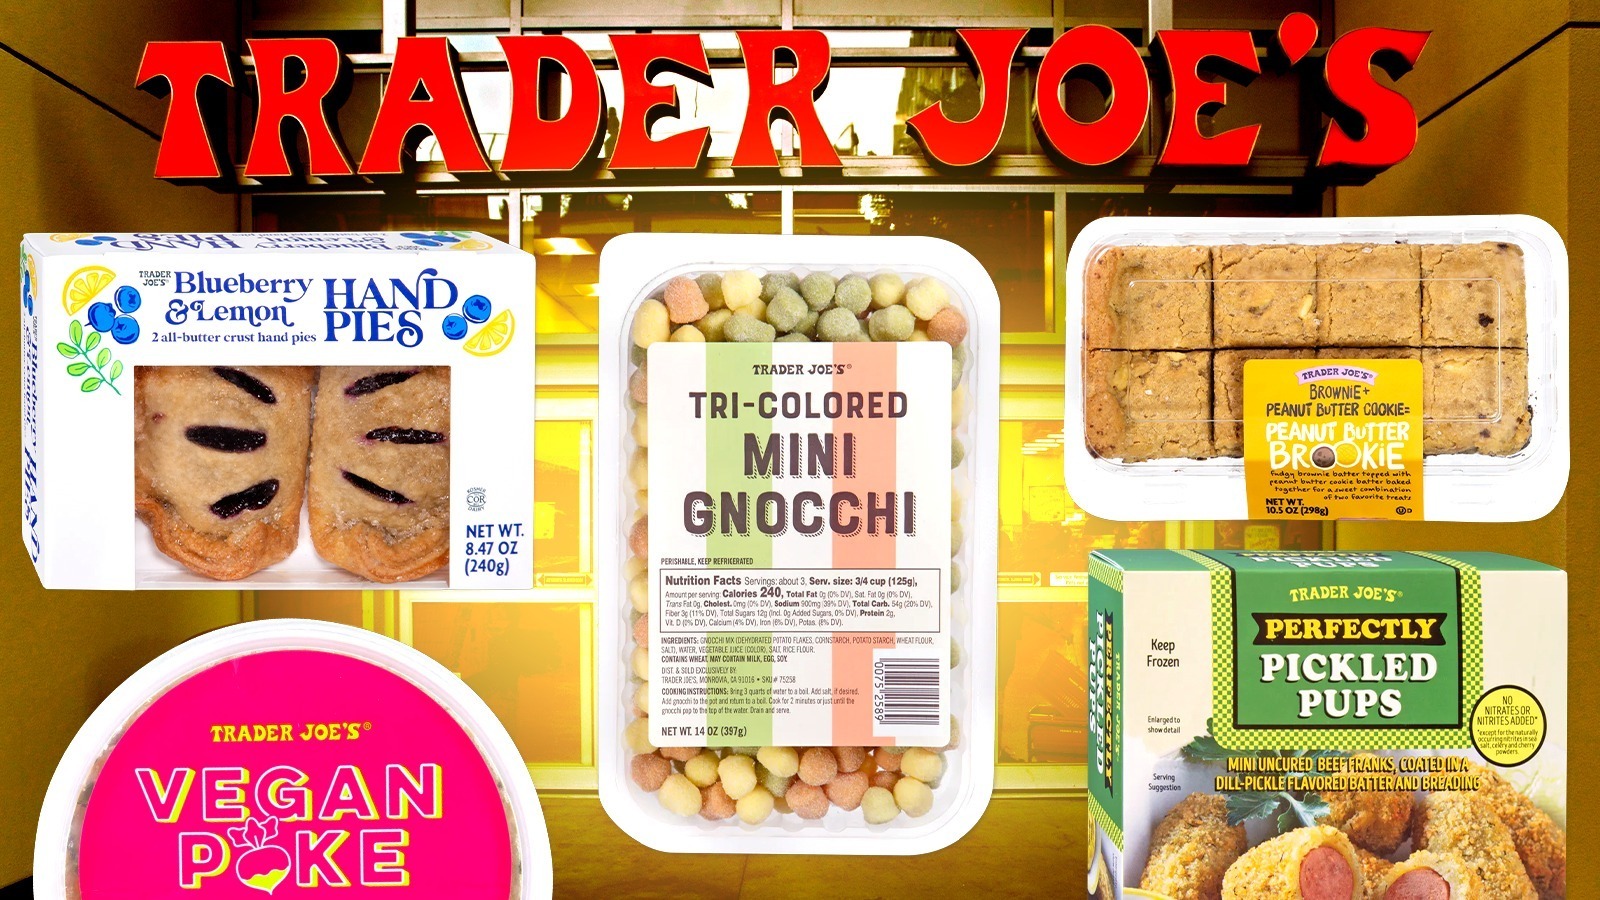 https://www.thedailymeal.com/img/gallery/12-of-the-newest-products-at-trader-joes-youre-missing-out-on/l-intro-1682528864.jpg